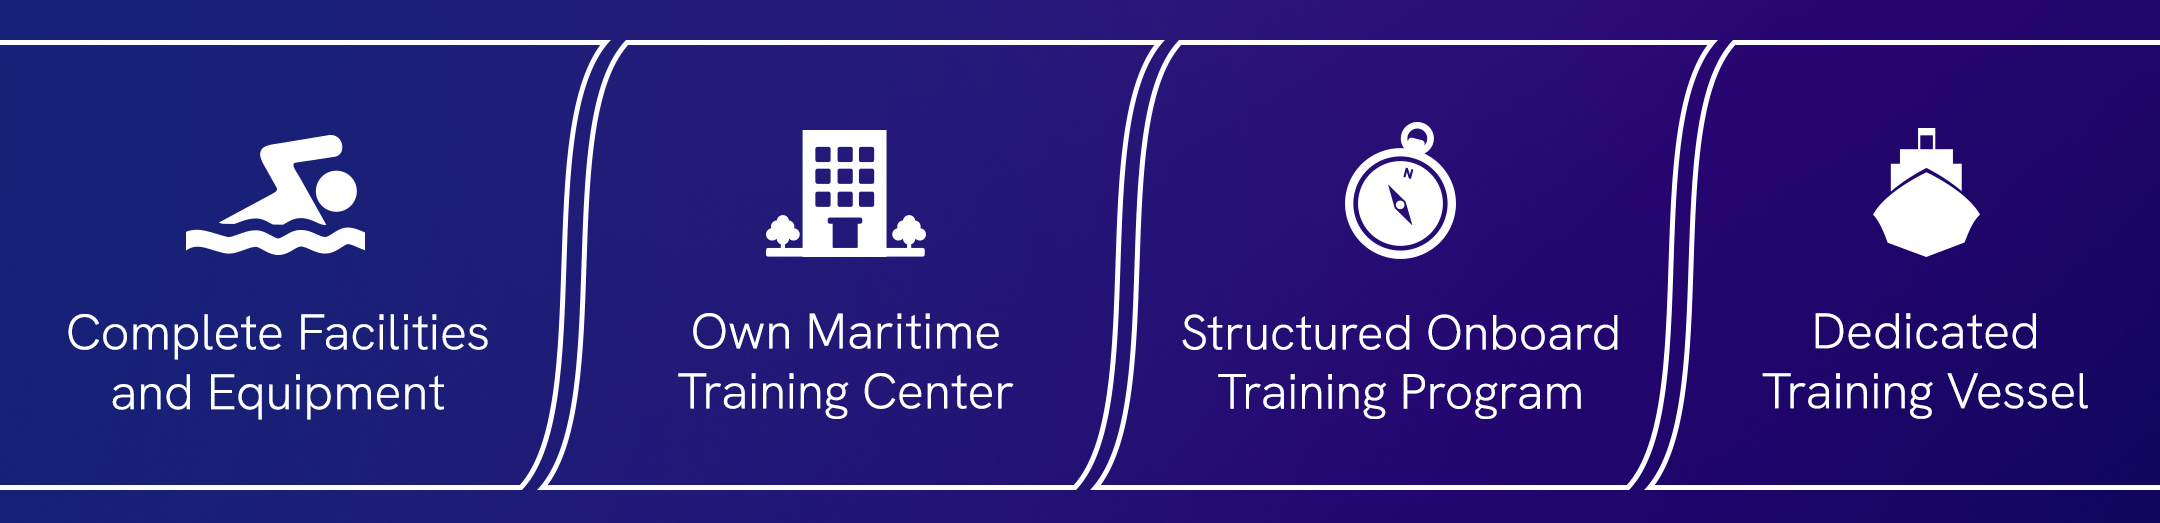 The PNTC Advantage: PNTC Colleges is a maritime school with complete facilities and equipment, its own maritime training center, a structured onboard training program, and a dedicated training vessel.